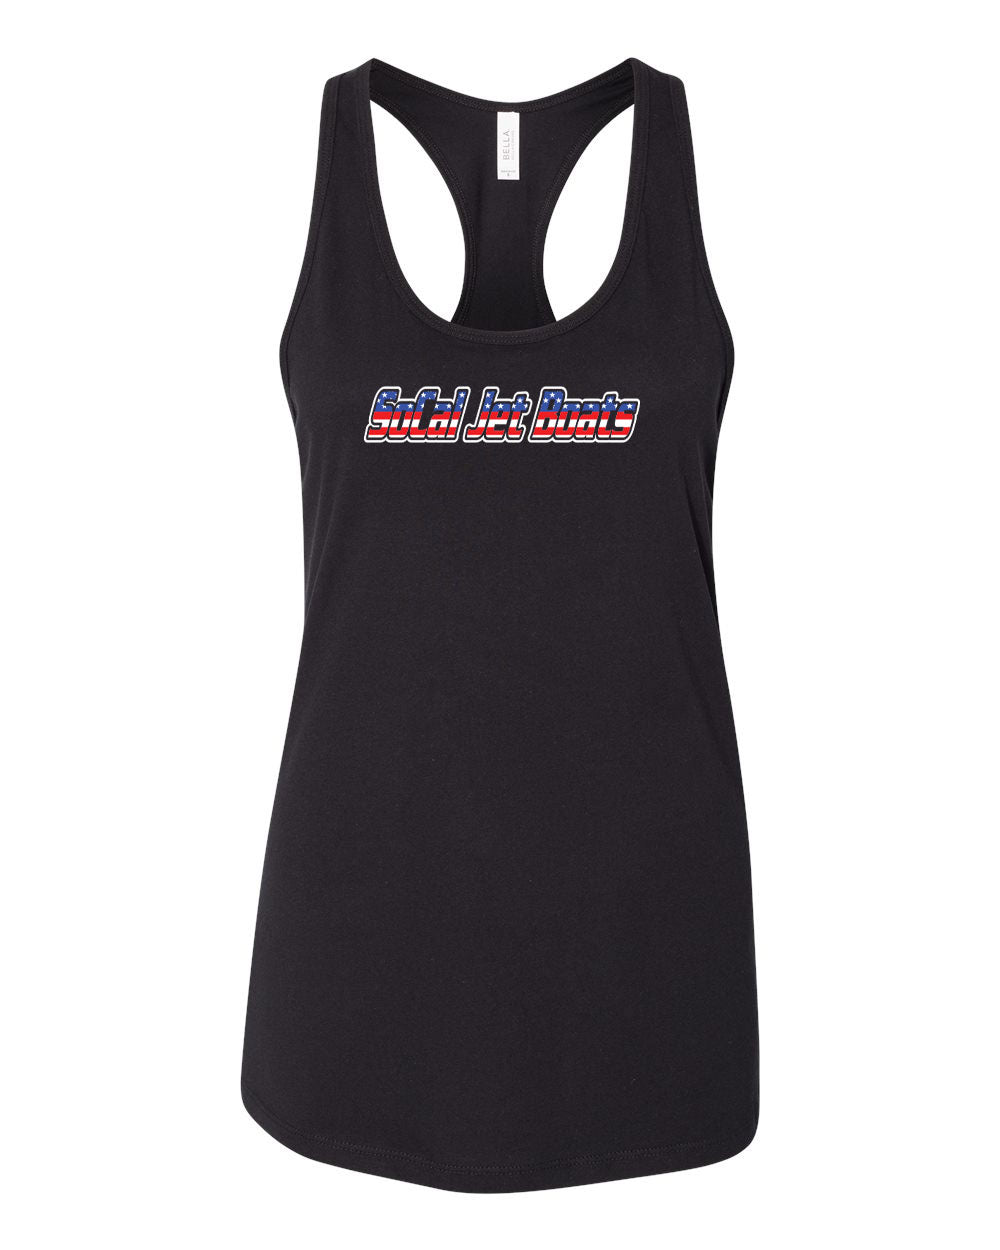 The Patriot Jet Boat Womens Tank Top